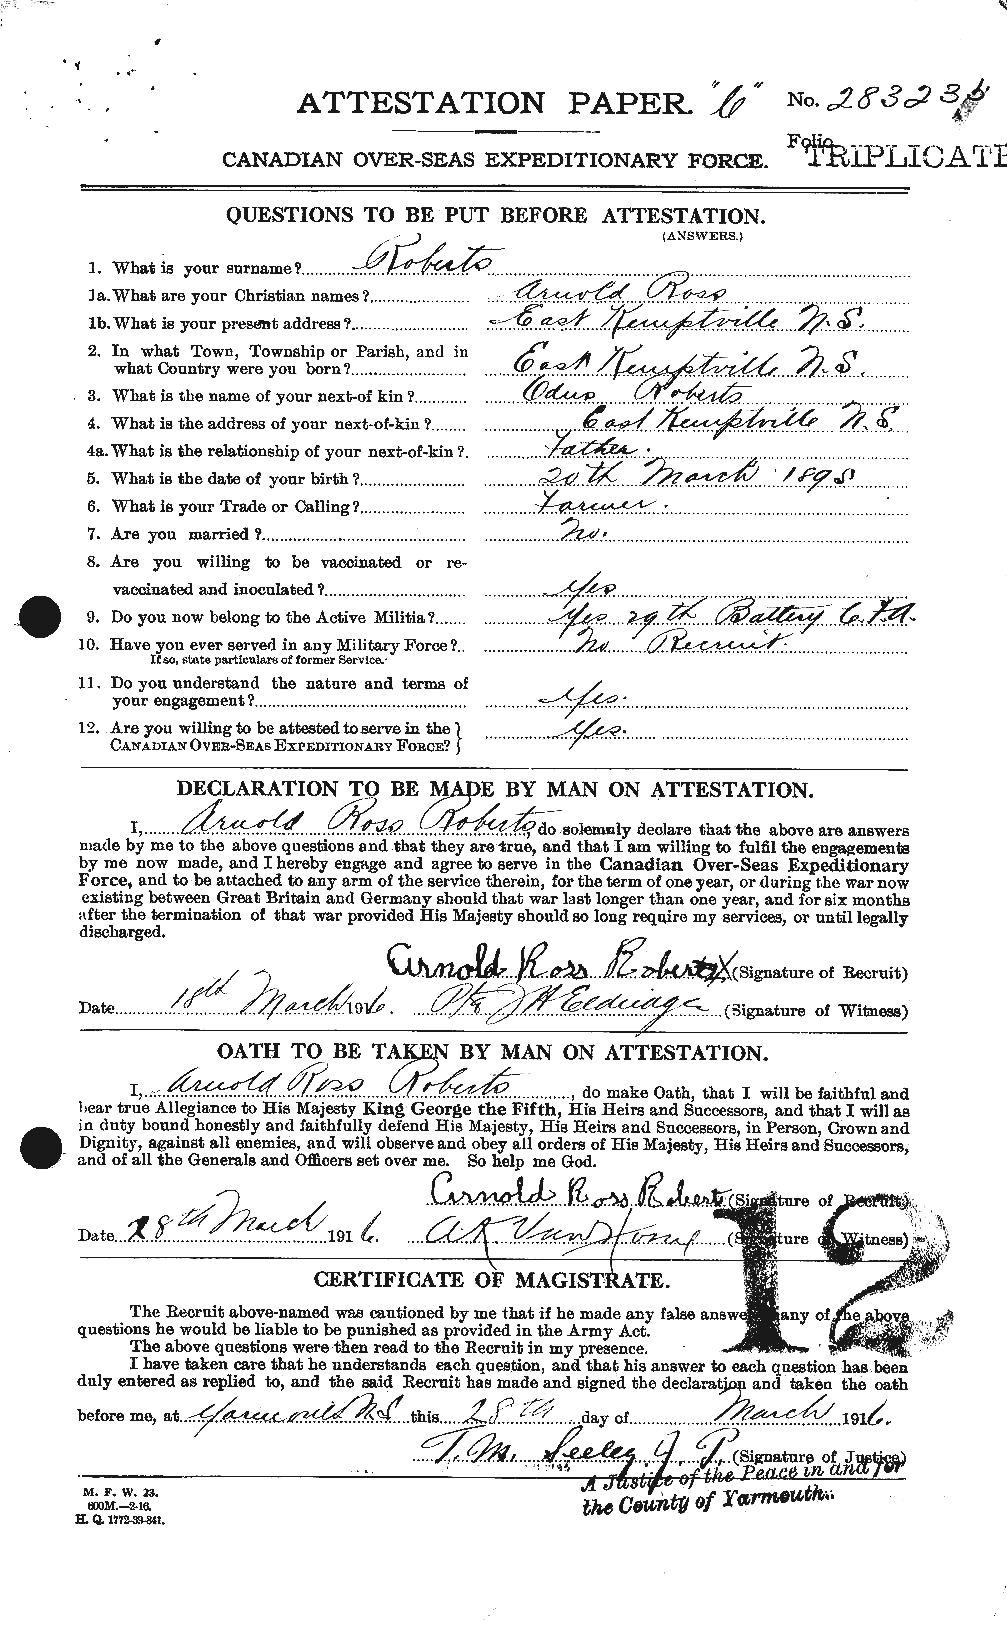 Personnel Records of the First World War - CEF 605842a